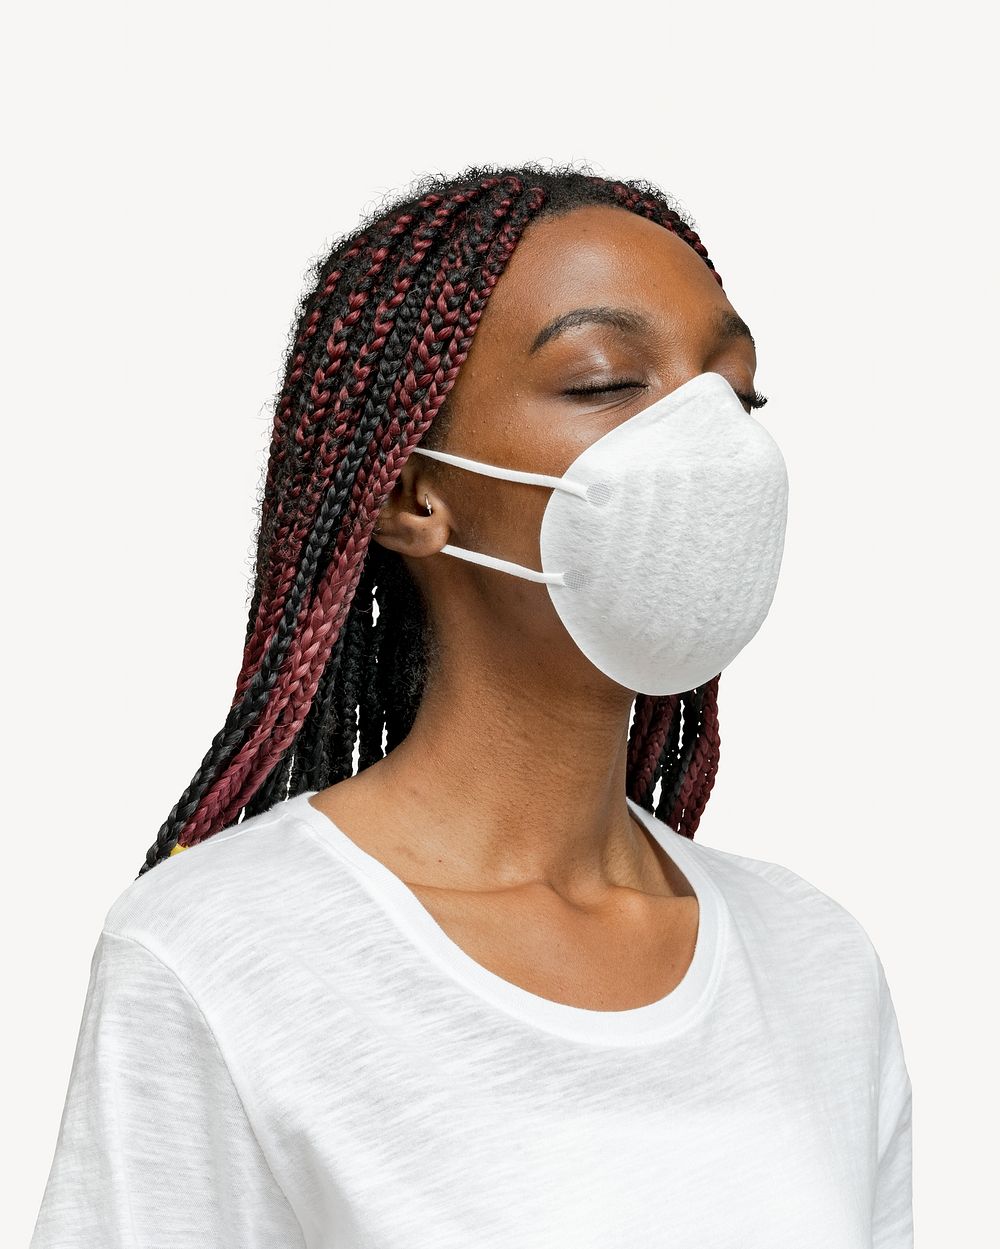 Black woman wearing mask isolated design